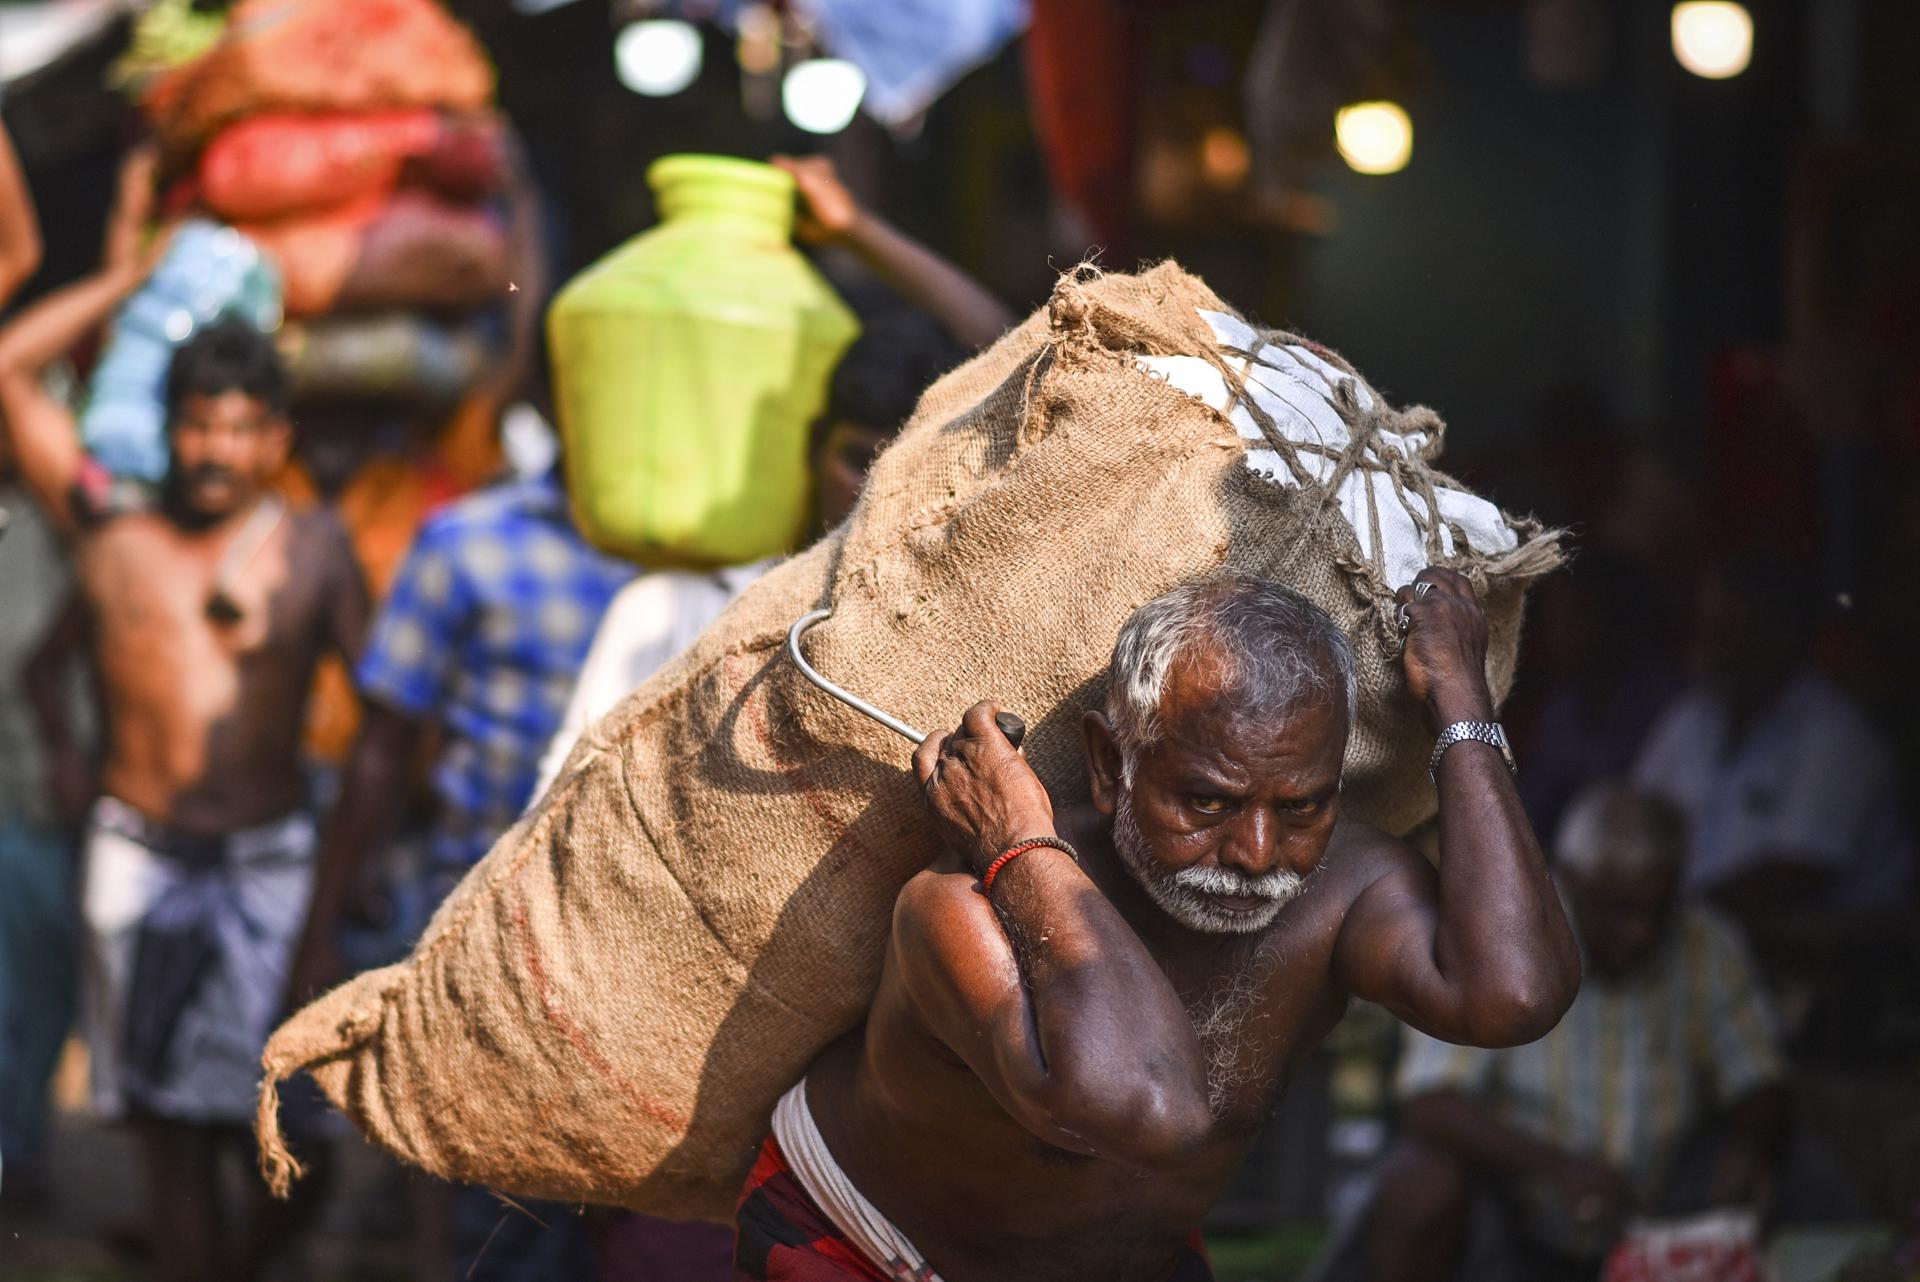 An Indian laborer carries a sack of vegetables at a market, in Chennai, India, 31 May 2023. EFE-EPA/IDREES MOHAMMED